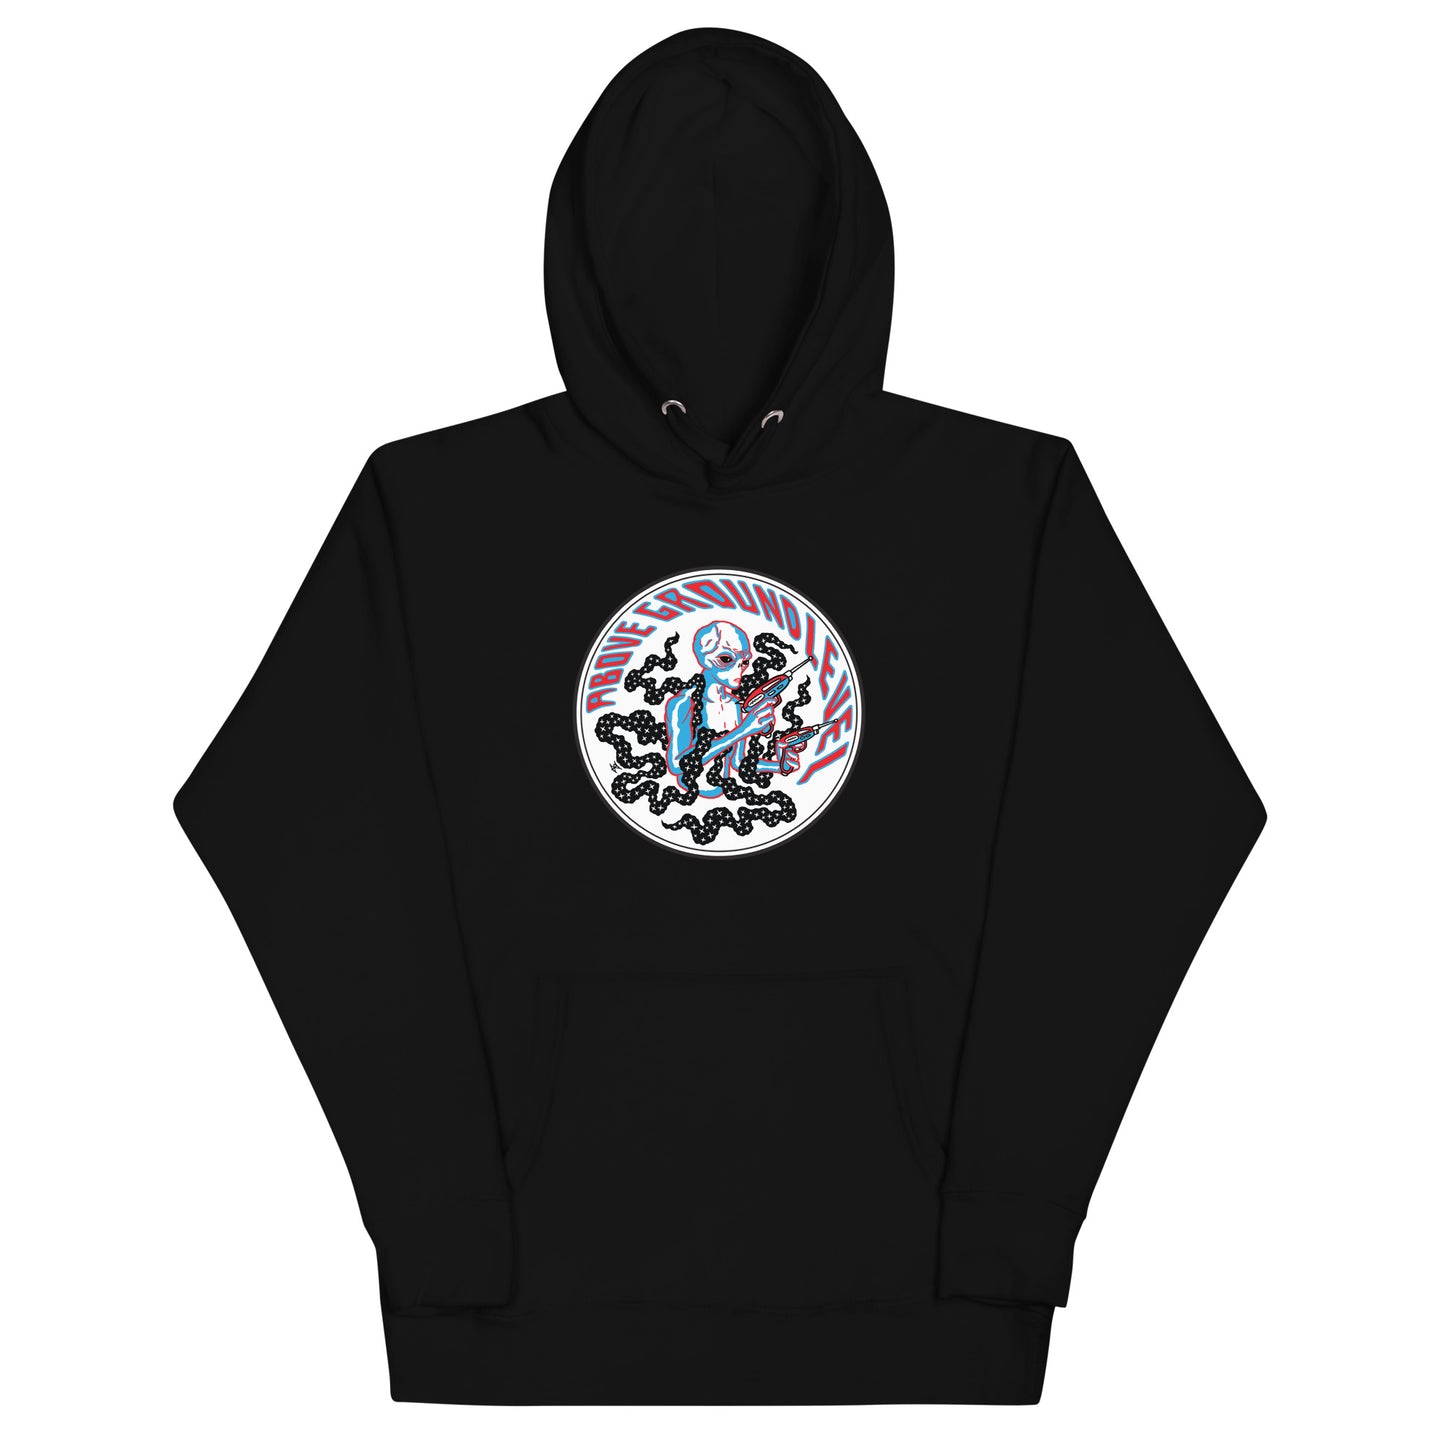 AGL Discs - Unisex Hoodie (with AGLien design by Ryan Koster)